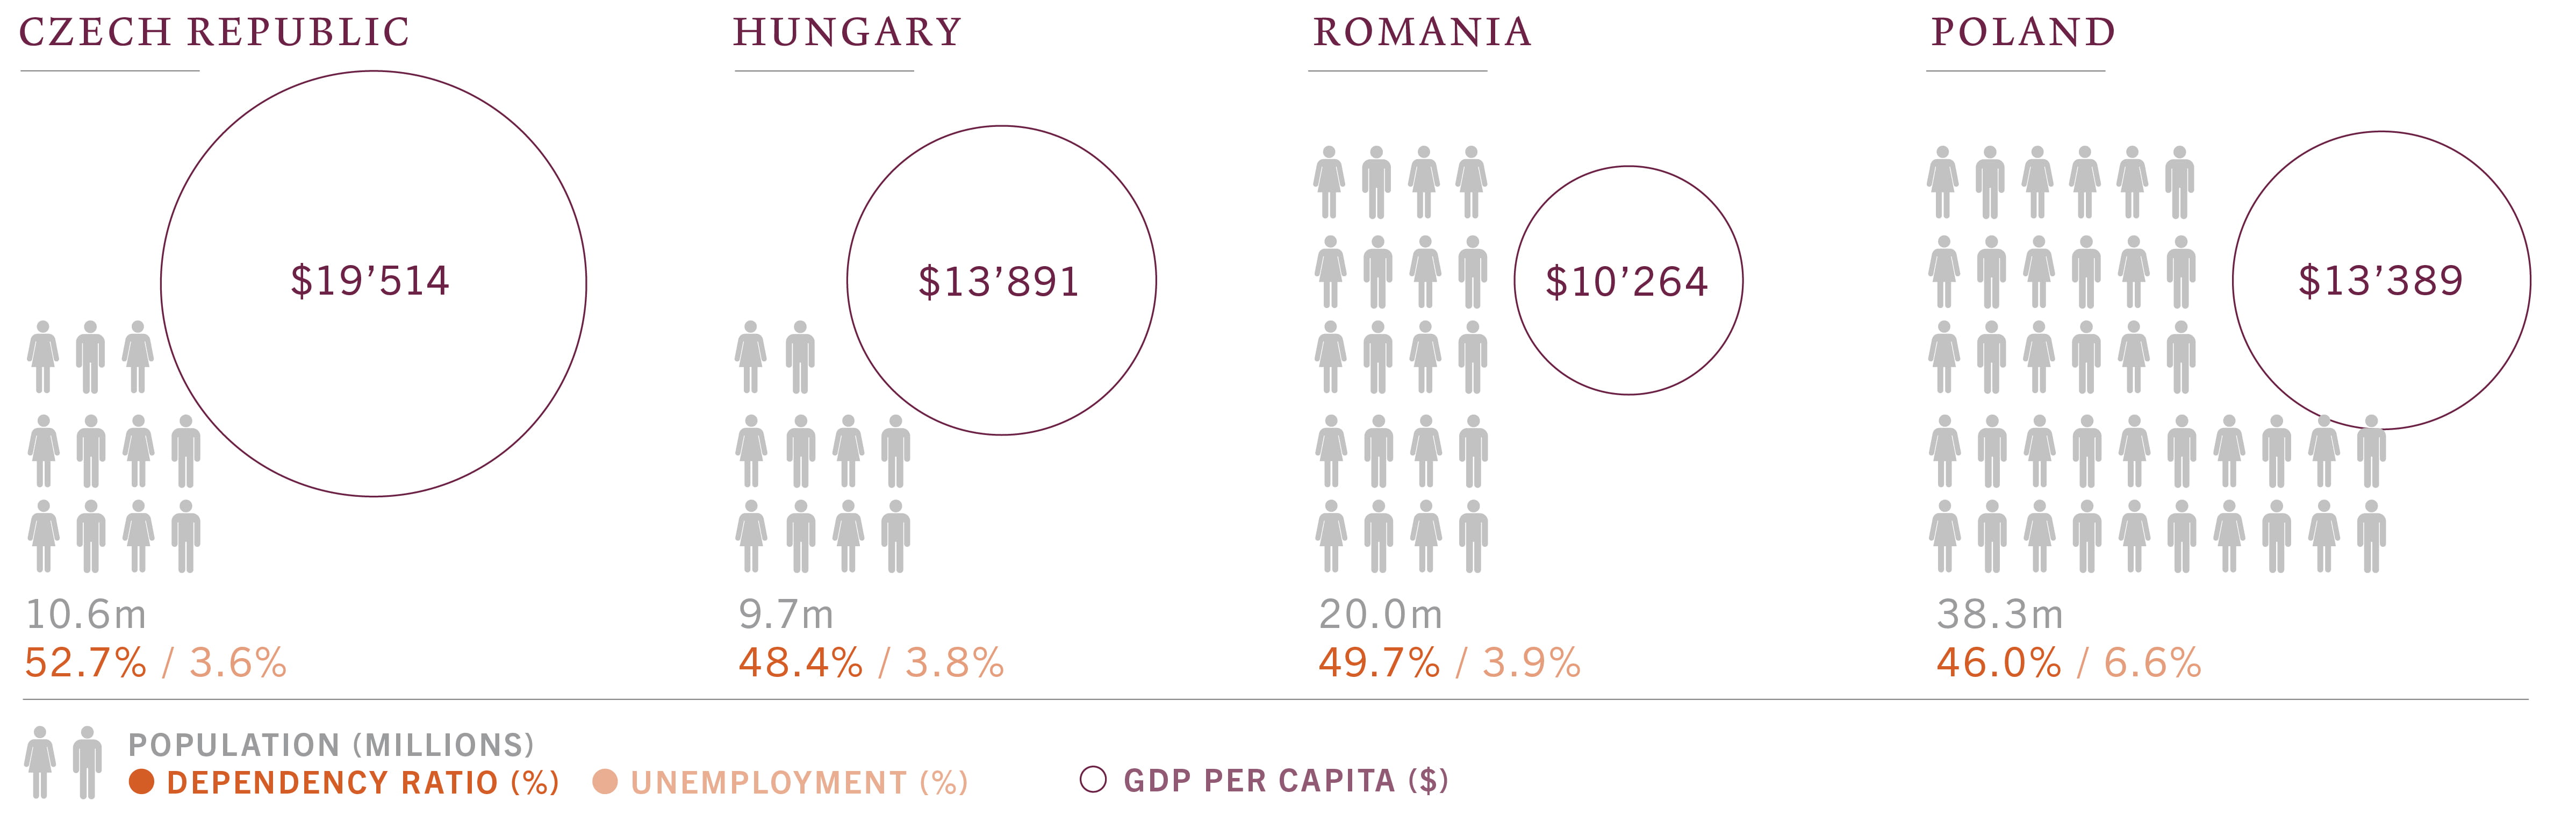 infographic about population, GDP per capita, unemployment and dependency ratios in CEE